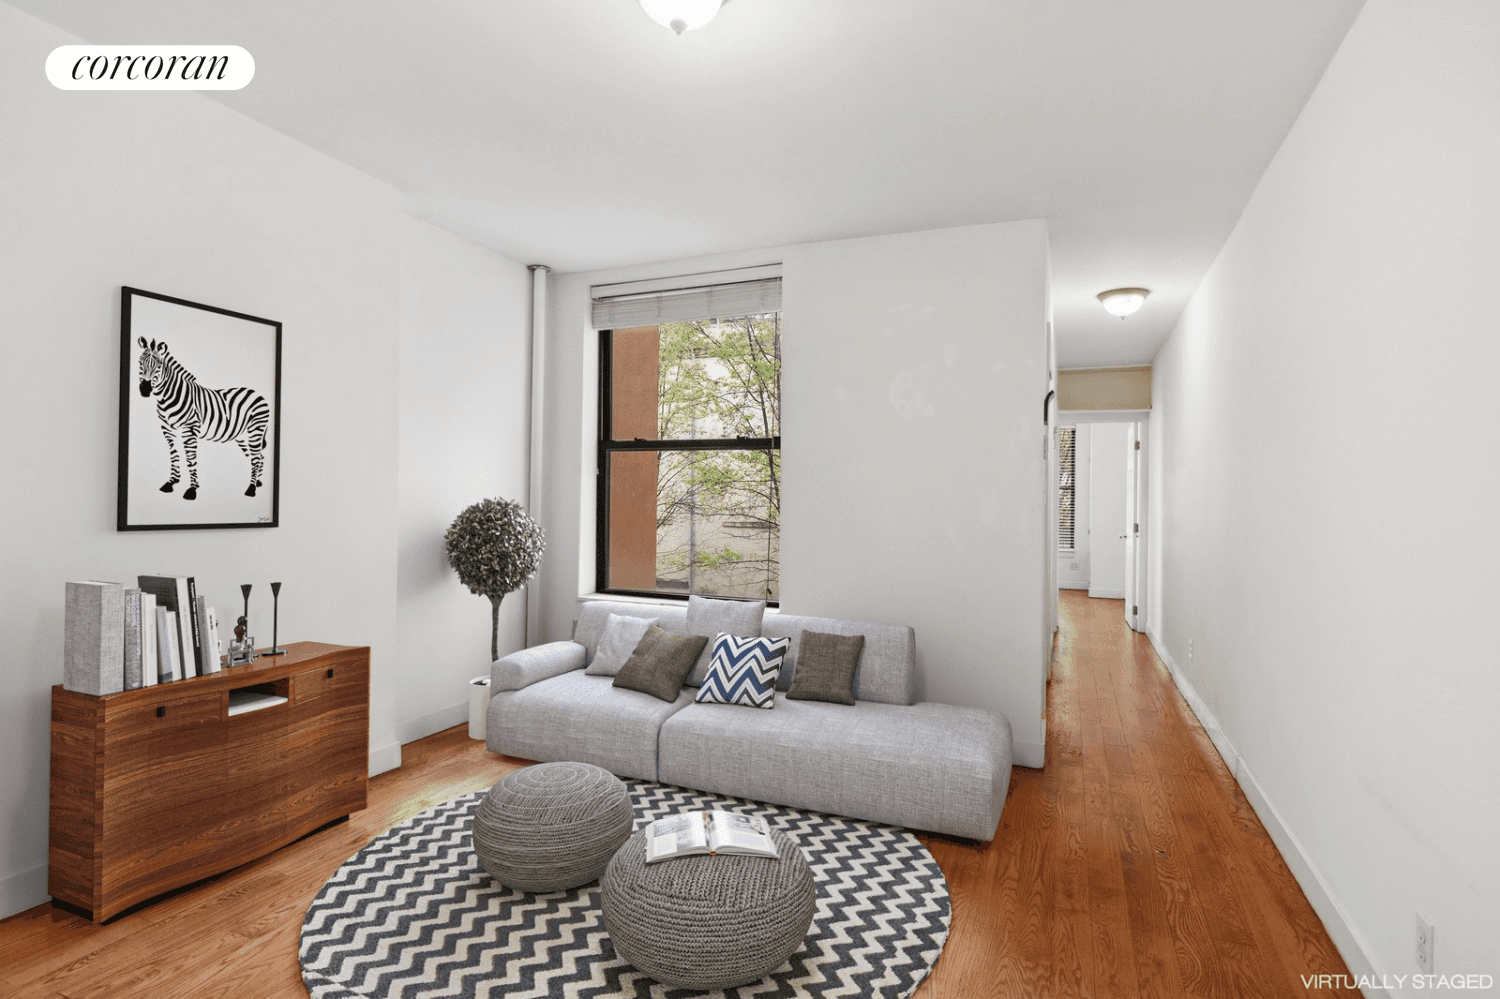 This charming one bedroom apartment with bright western and northern exposures is an opportunity to either invest or live in the vibrant neighborhood of South Harlem.